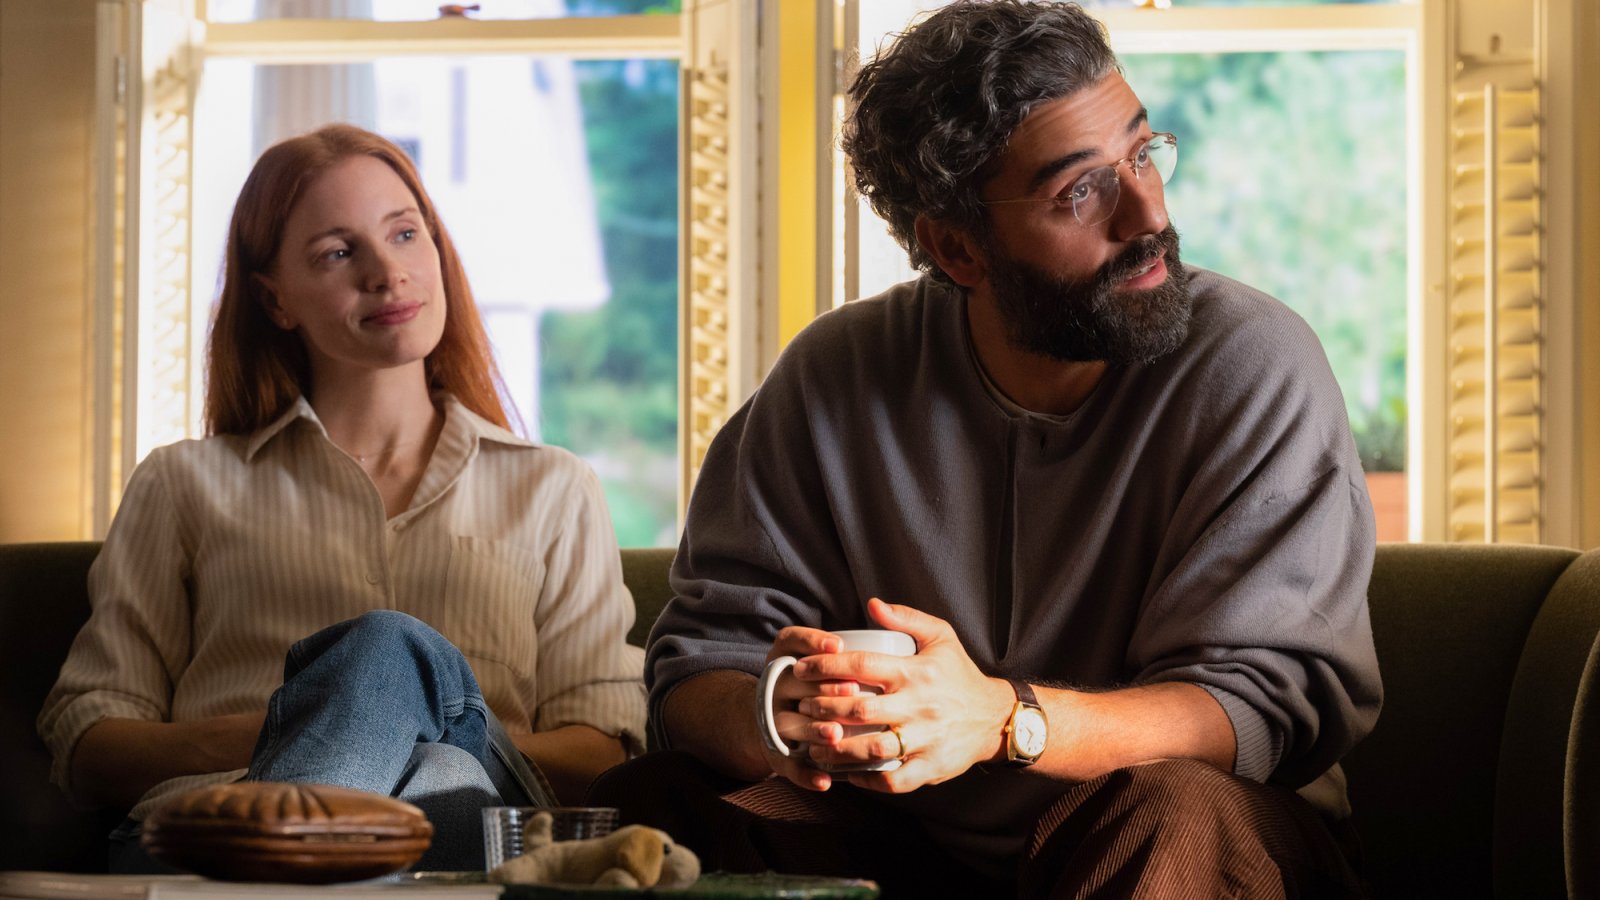 Jessica Chastain: 'After 'The Wedding Scene' my friendship with Oscar Isaac has never been the same'